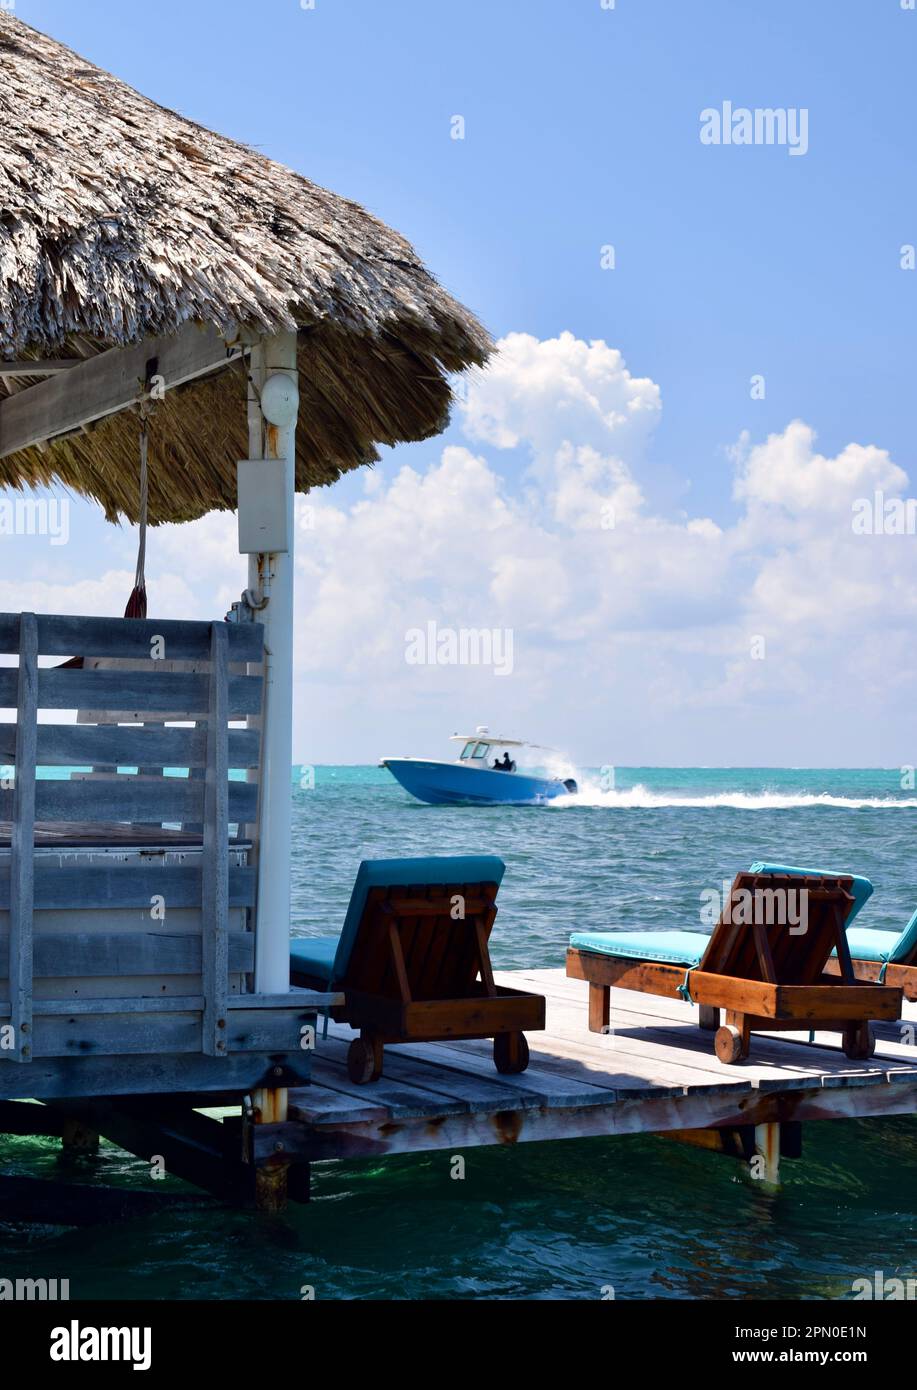 Lounge chairs on a dock and next to a palapa, facing the sea and a passing boat, in San Pedro, Ambergris Caye, Belize, Caribbean/Central America. Stock Photo